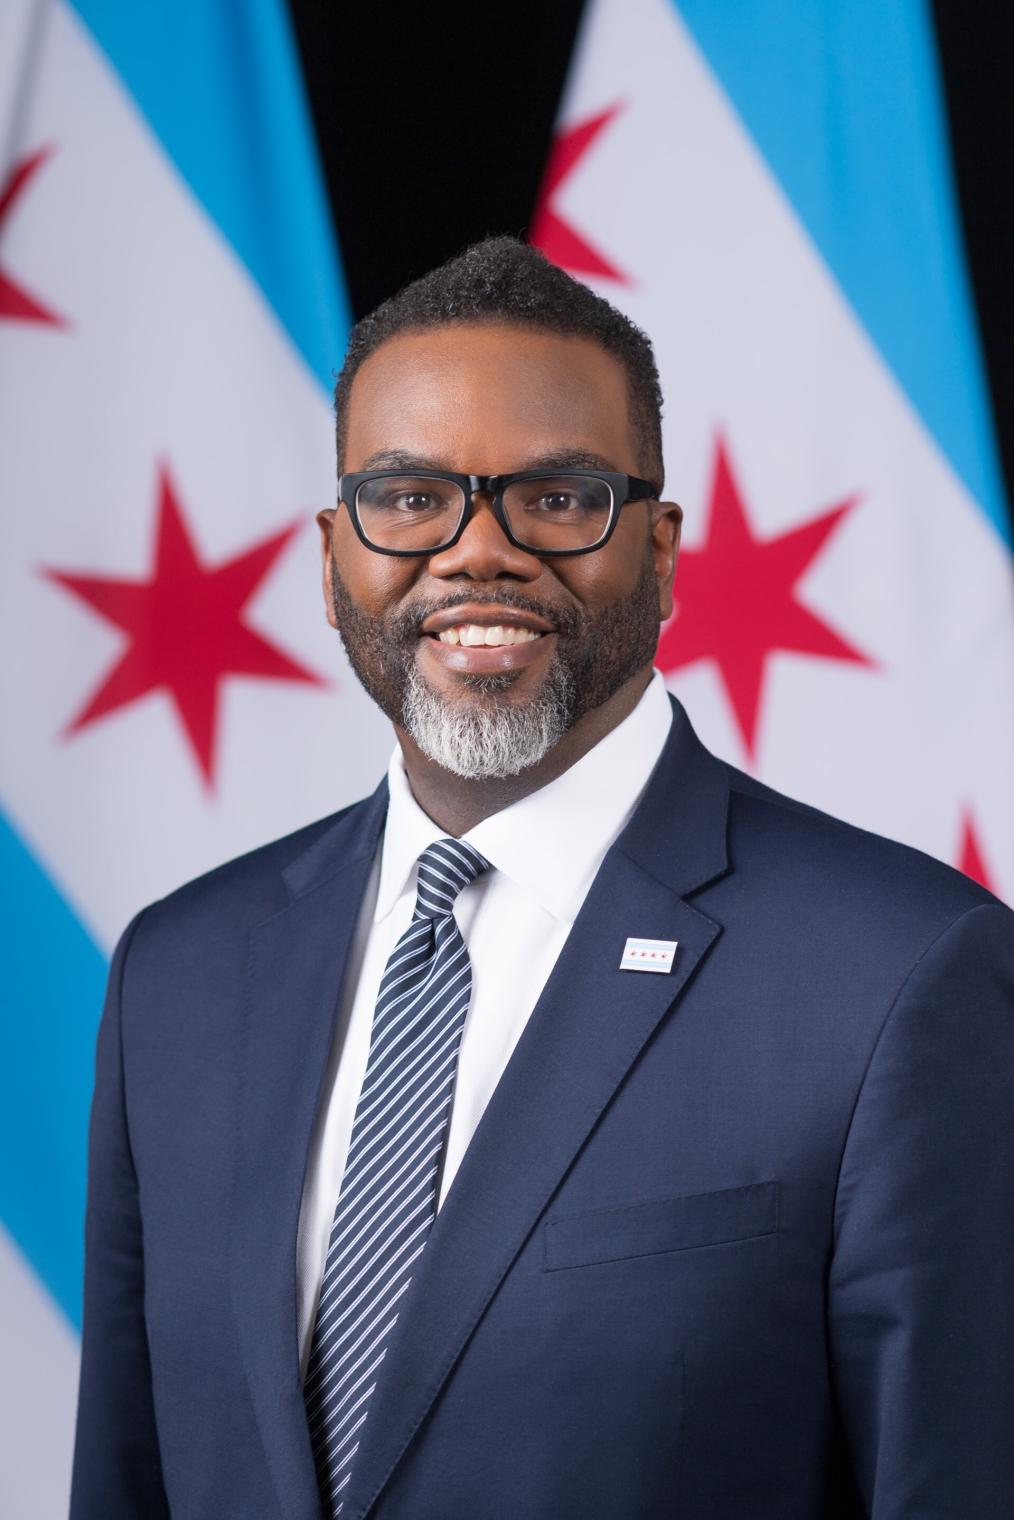 A photographic portrait of a Black man with short, cropped hair and salt and pepper beard smiling for the camera. He wears glasses and a suit and tie. Behind him is part of the Chicago city flag, with 6-pointed red stars and blue stripes.